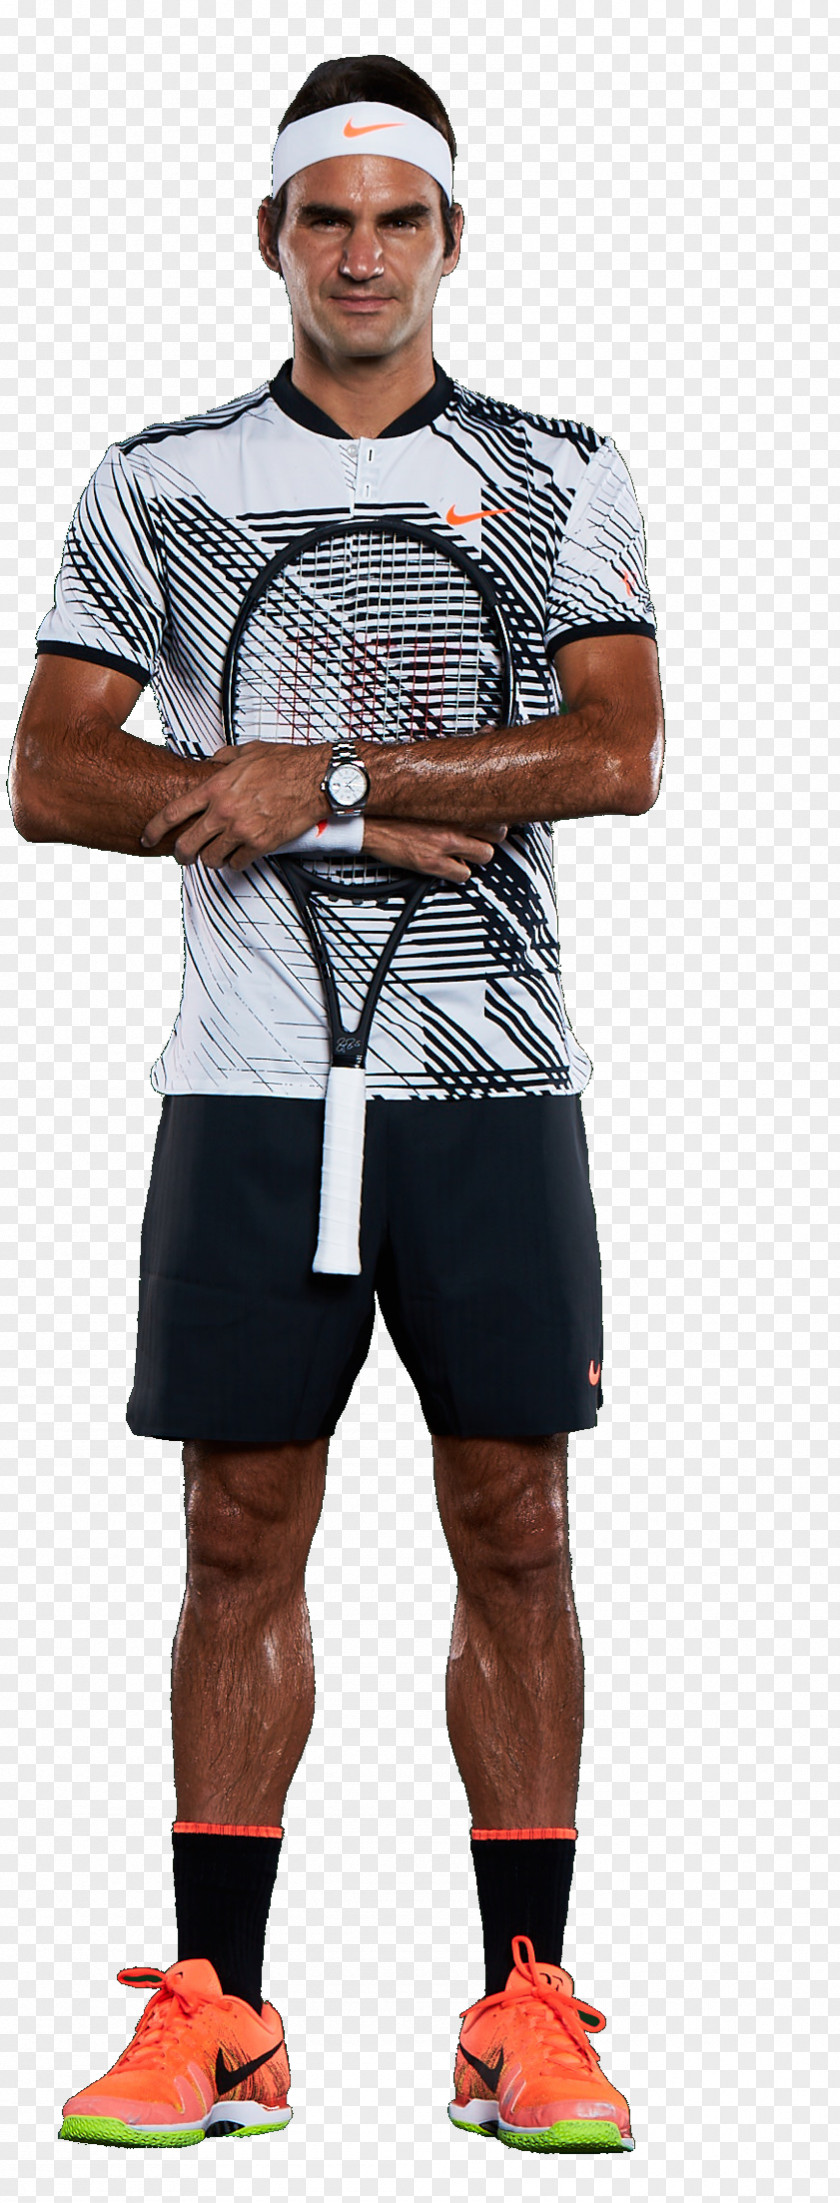 Roger Federer Foundation Australian Open 2017 Match For Africa And Joining Forces The Benefit Of Children 2018 Tennis Season PNG